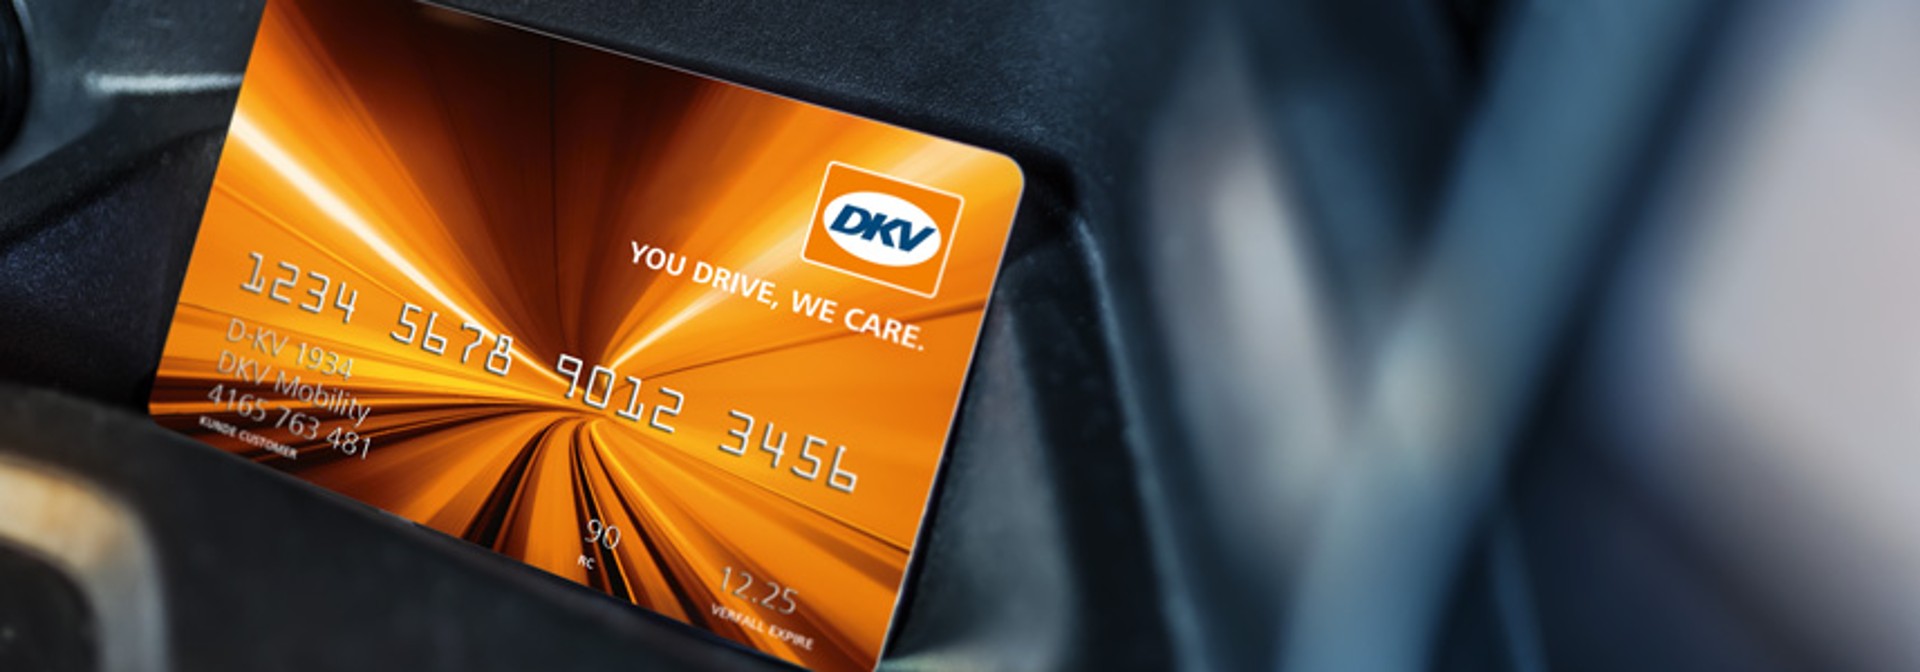 Easy Payment with DKV.